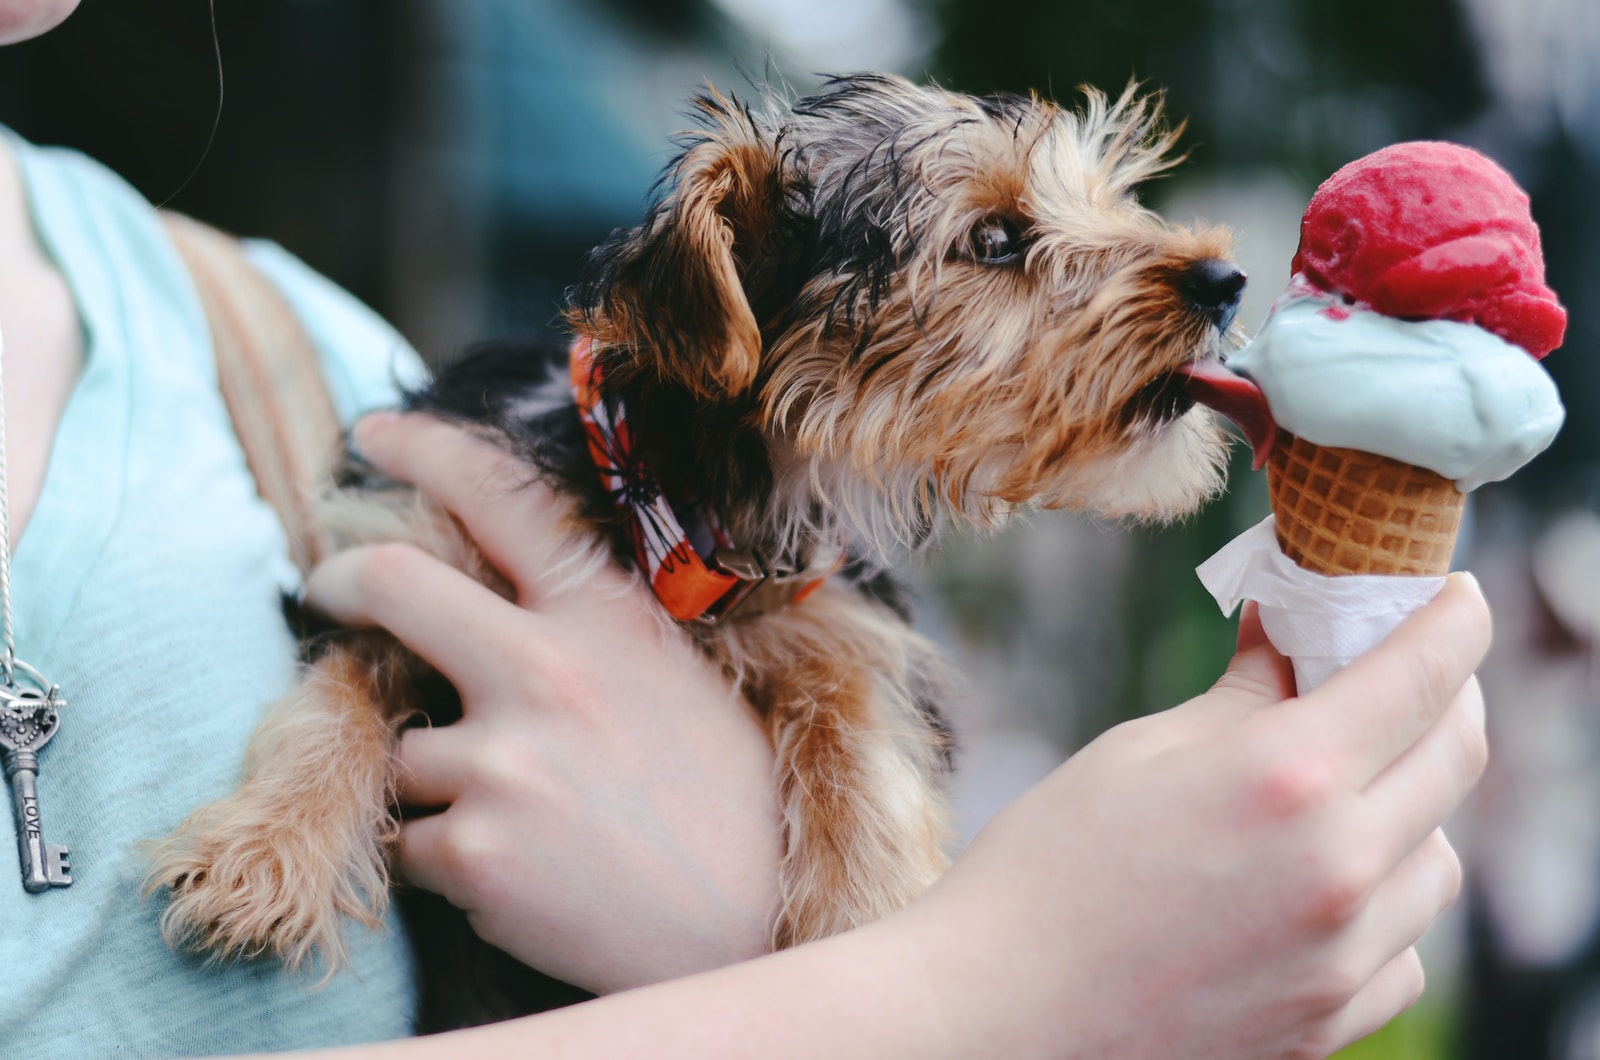 person holding brown and black airedale terrier puppy licking ice cream on cone